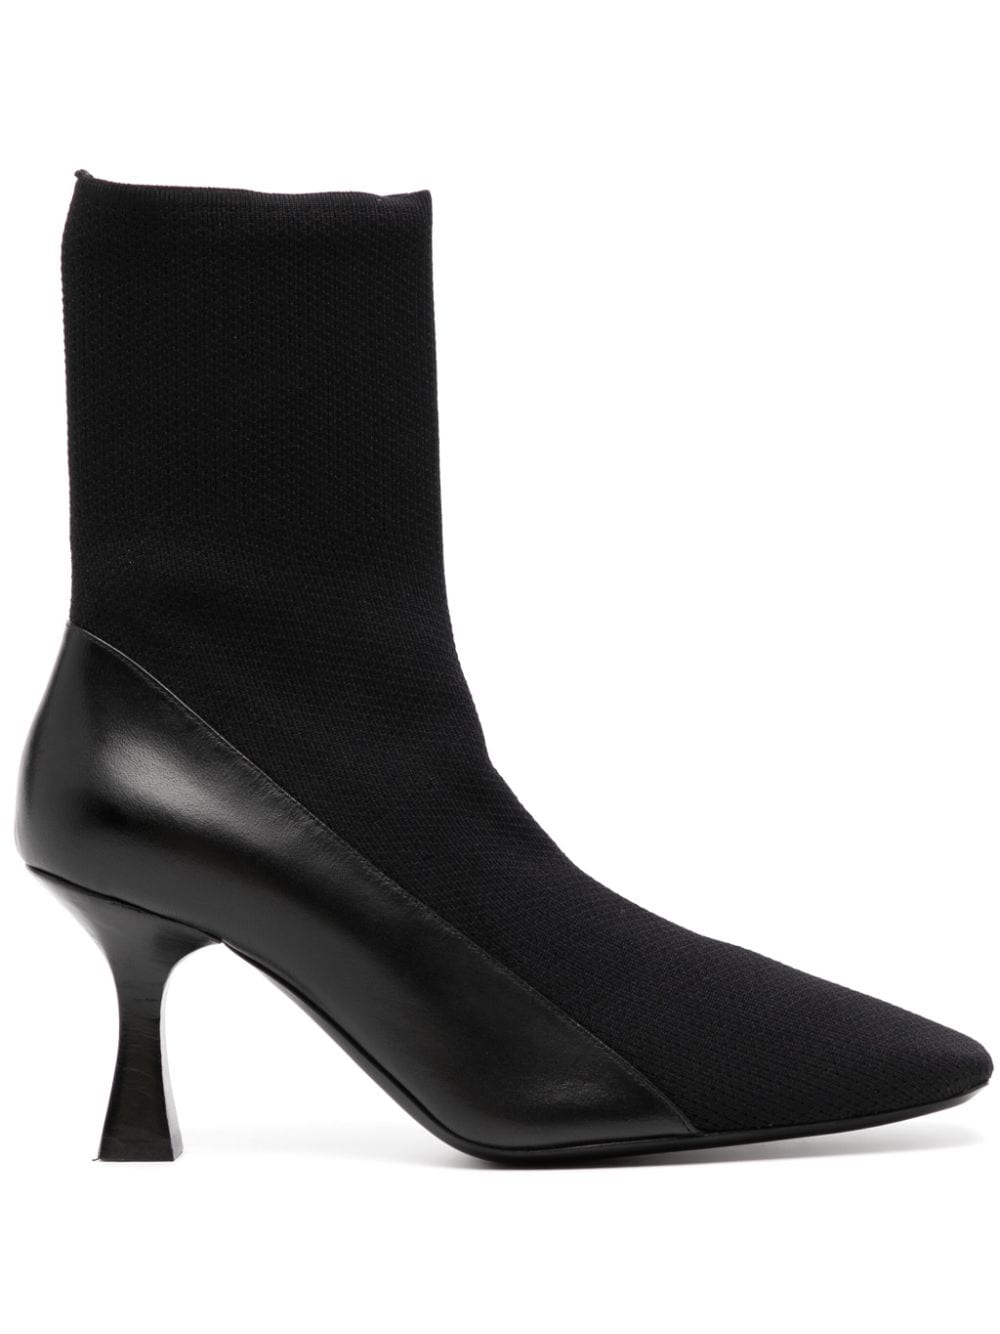 NEOUS Ruch 70mm leather ankle boots - Black von NEOUS